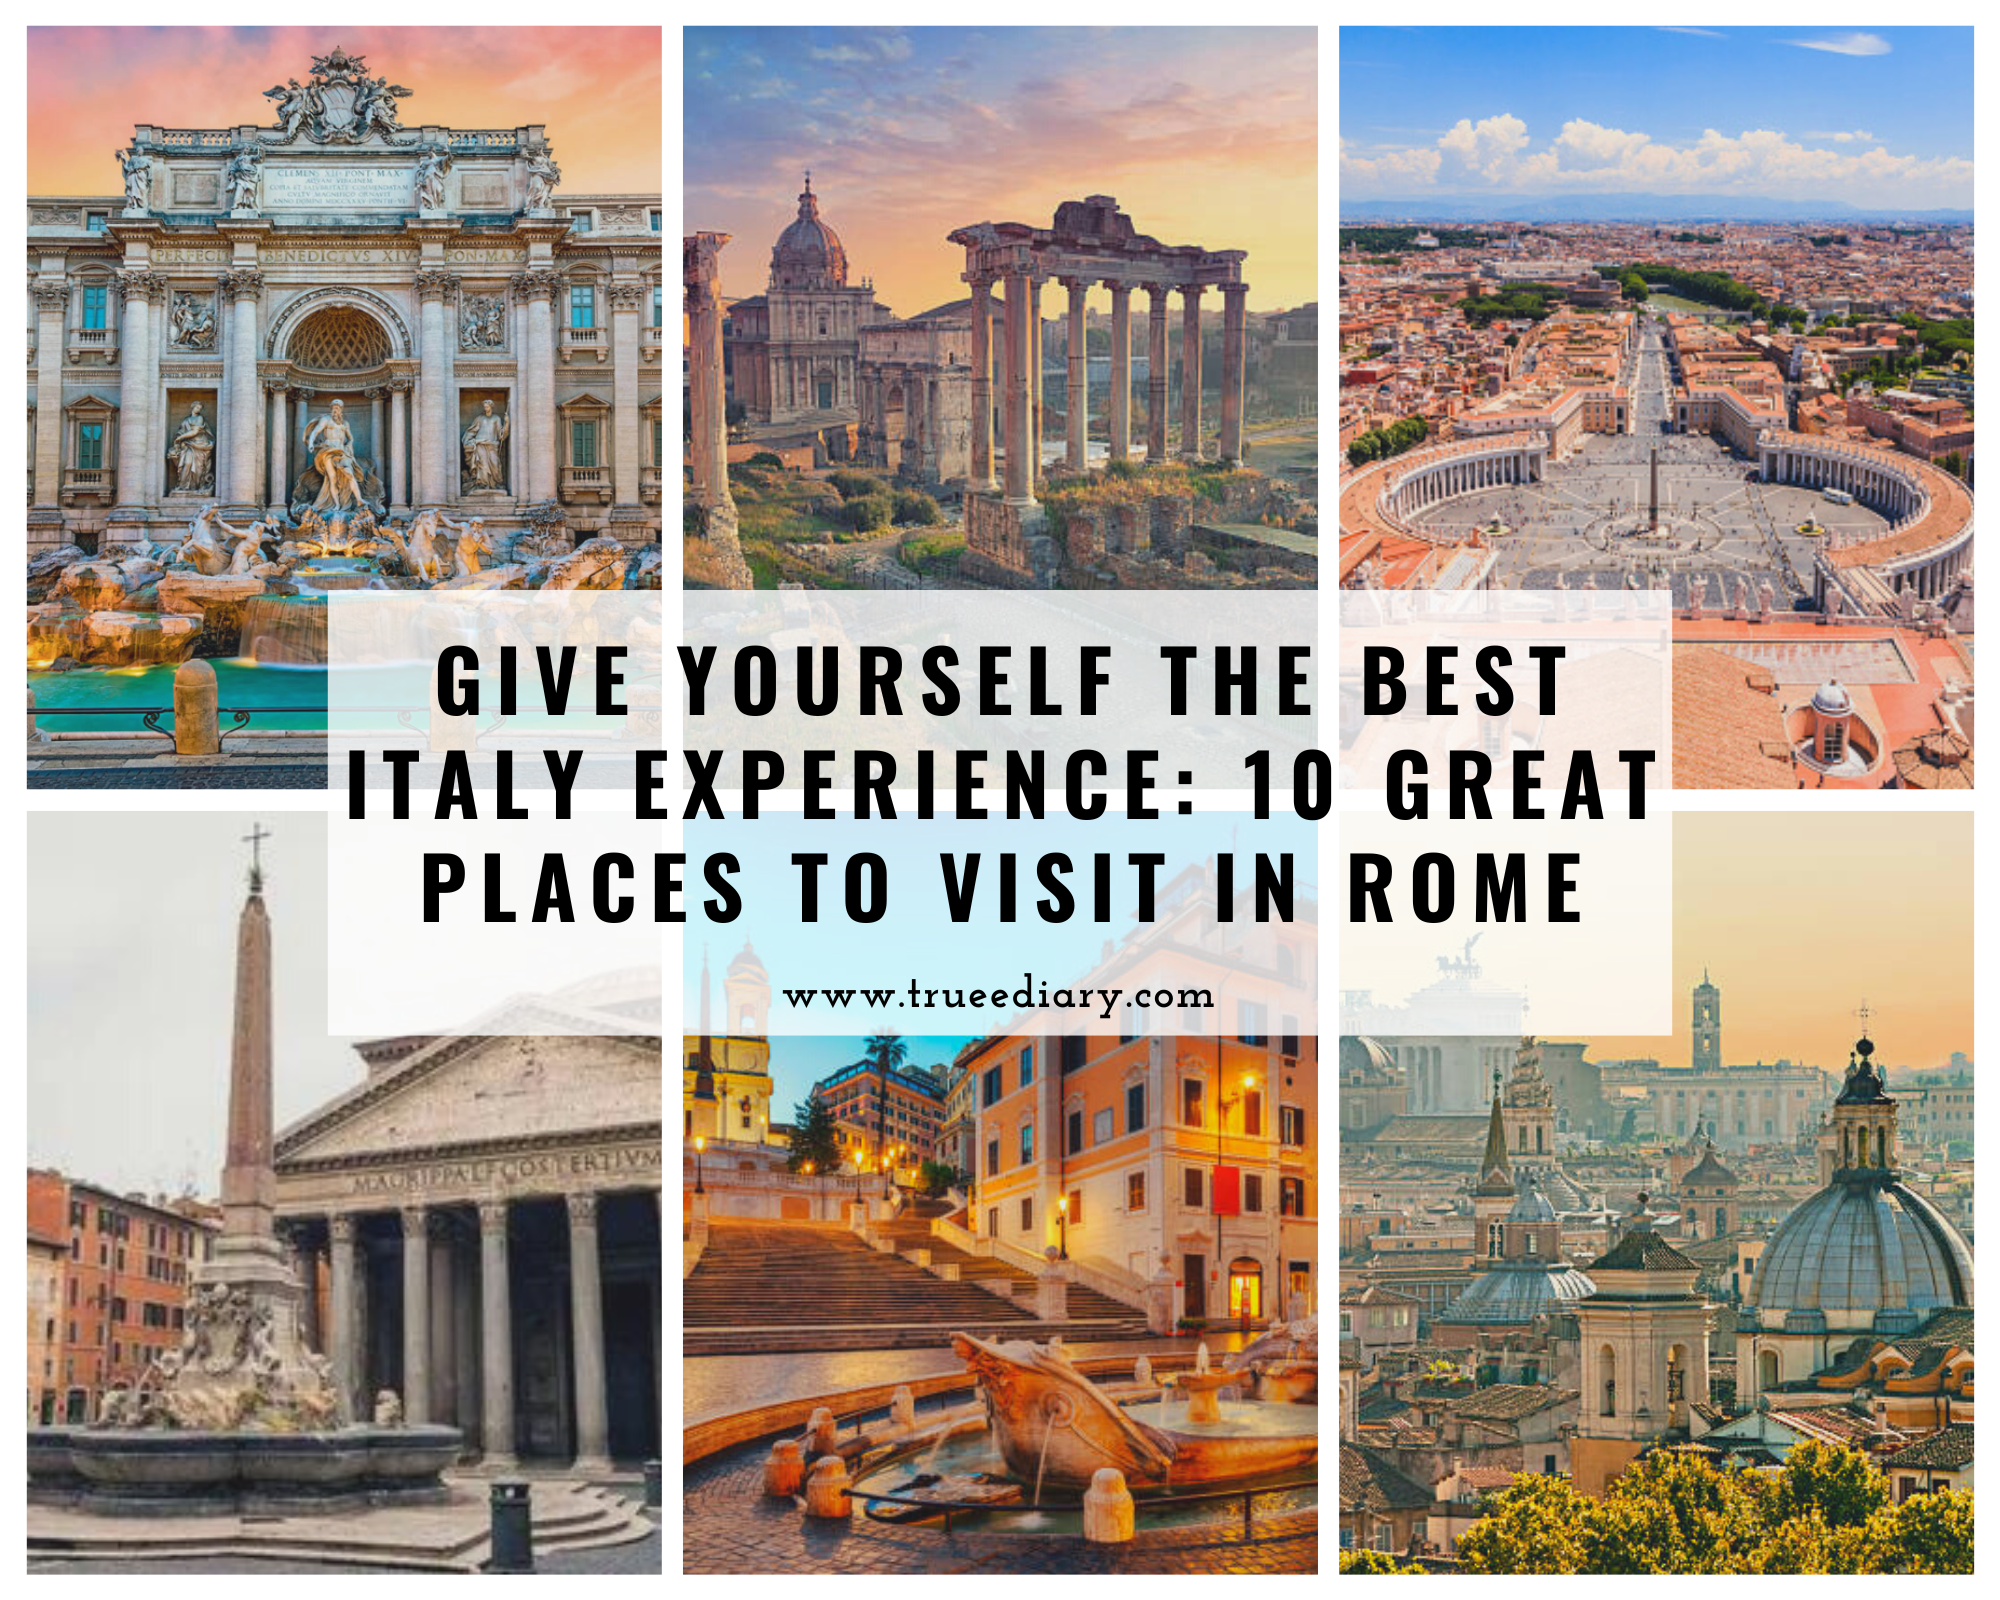 Give Yourself The Best Italy Experience 10 Great Places to Visit in Rome